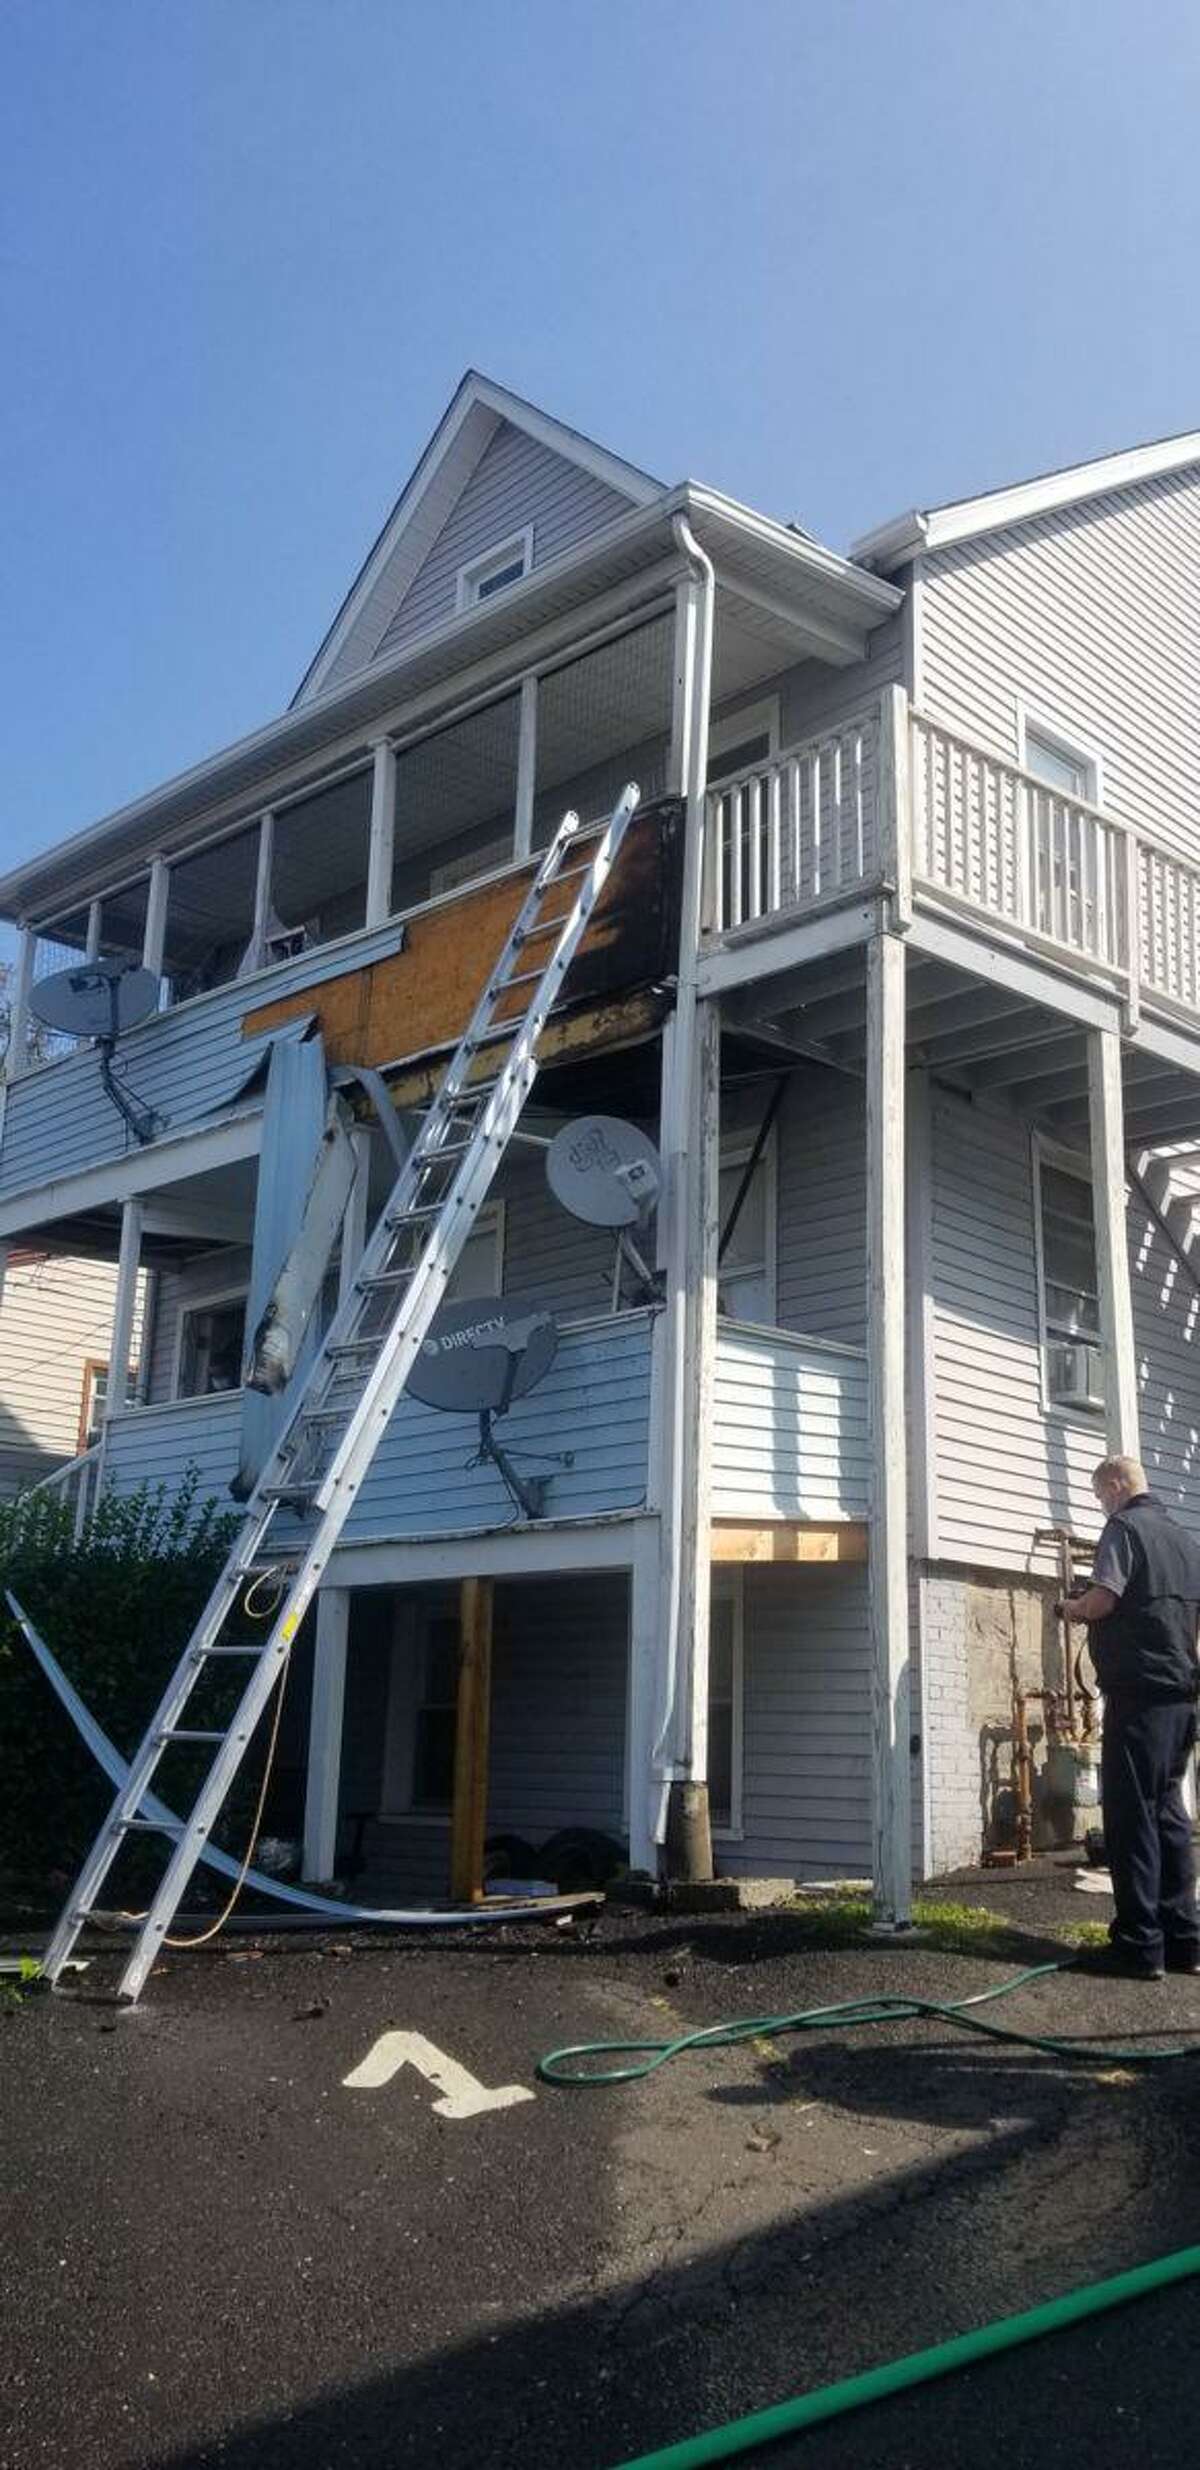 Quick acting neighbors who reported a fire at a multifamily home on Lockwood Avenue on Monday helped firefighters extinguish the blaze before it reached the interior of the home.